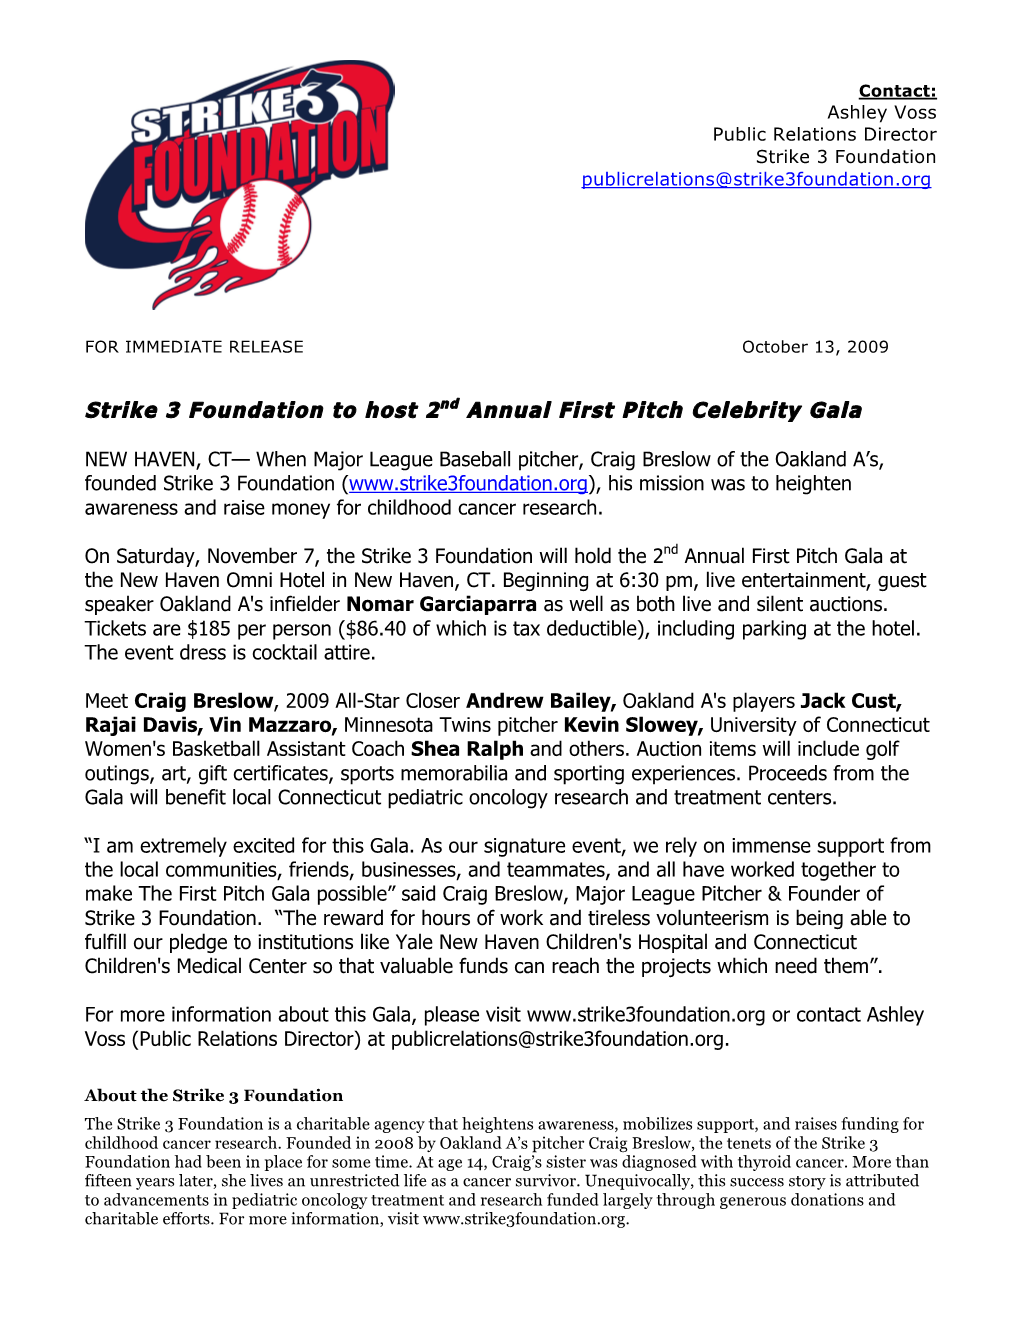 Strike 3 Foundation to Host 2Nd Annual First Pitch Celebrity Gala